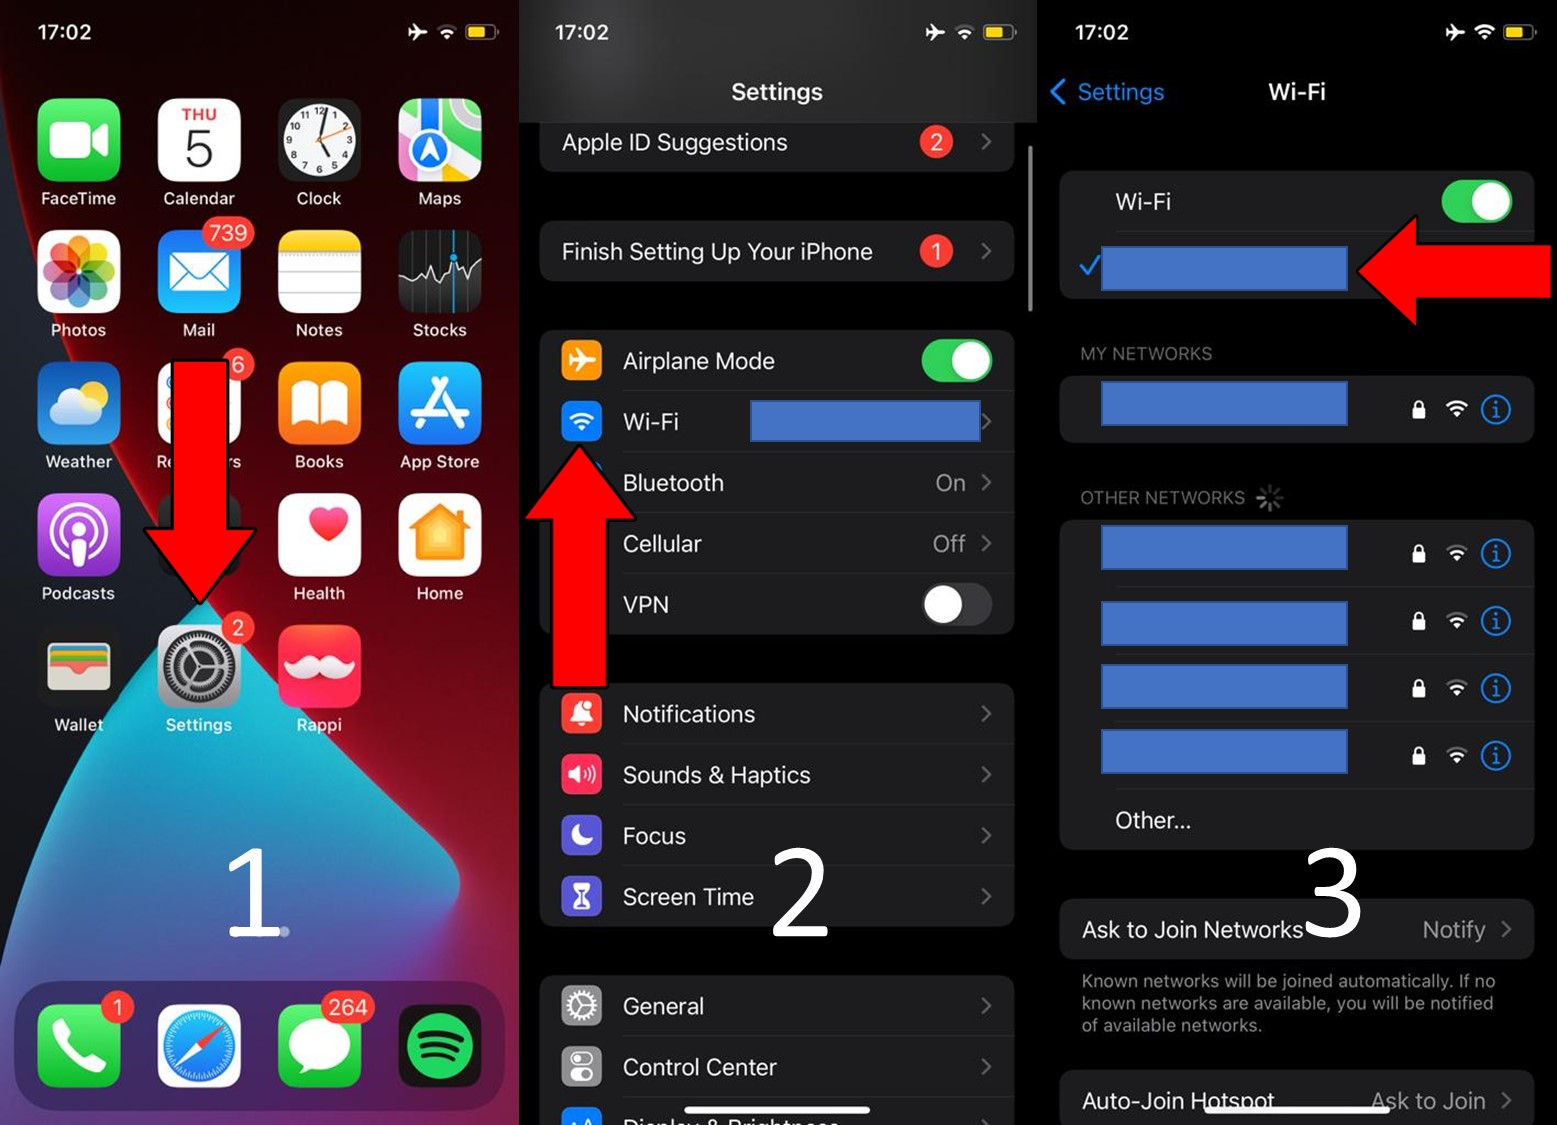 How to check networks on iOS